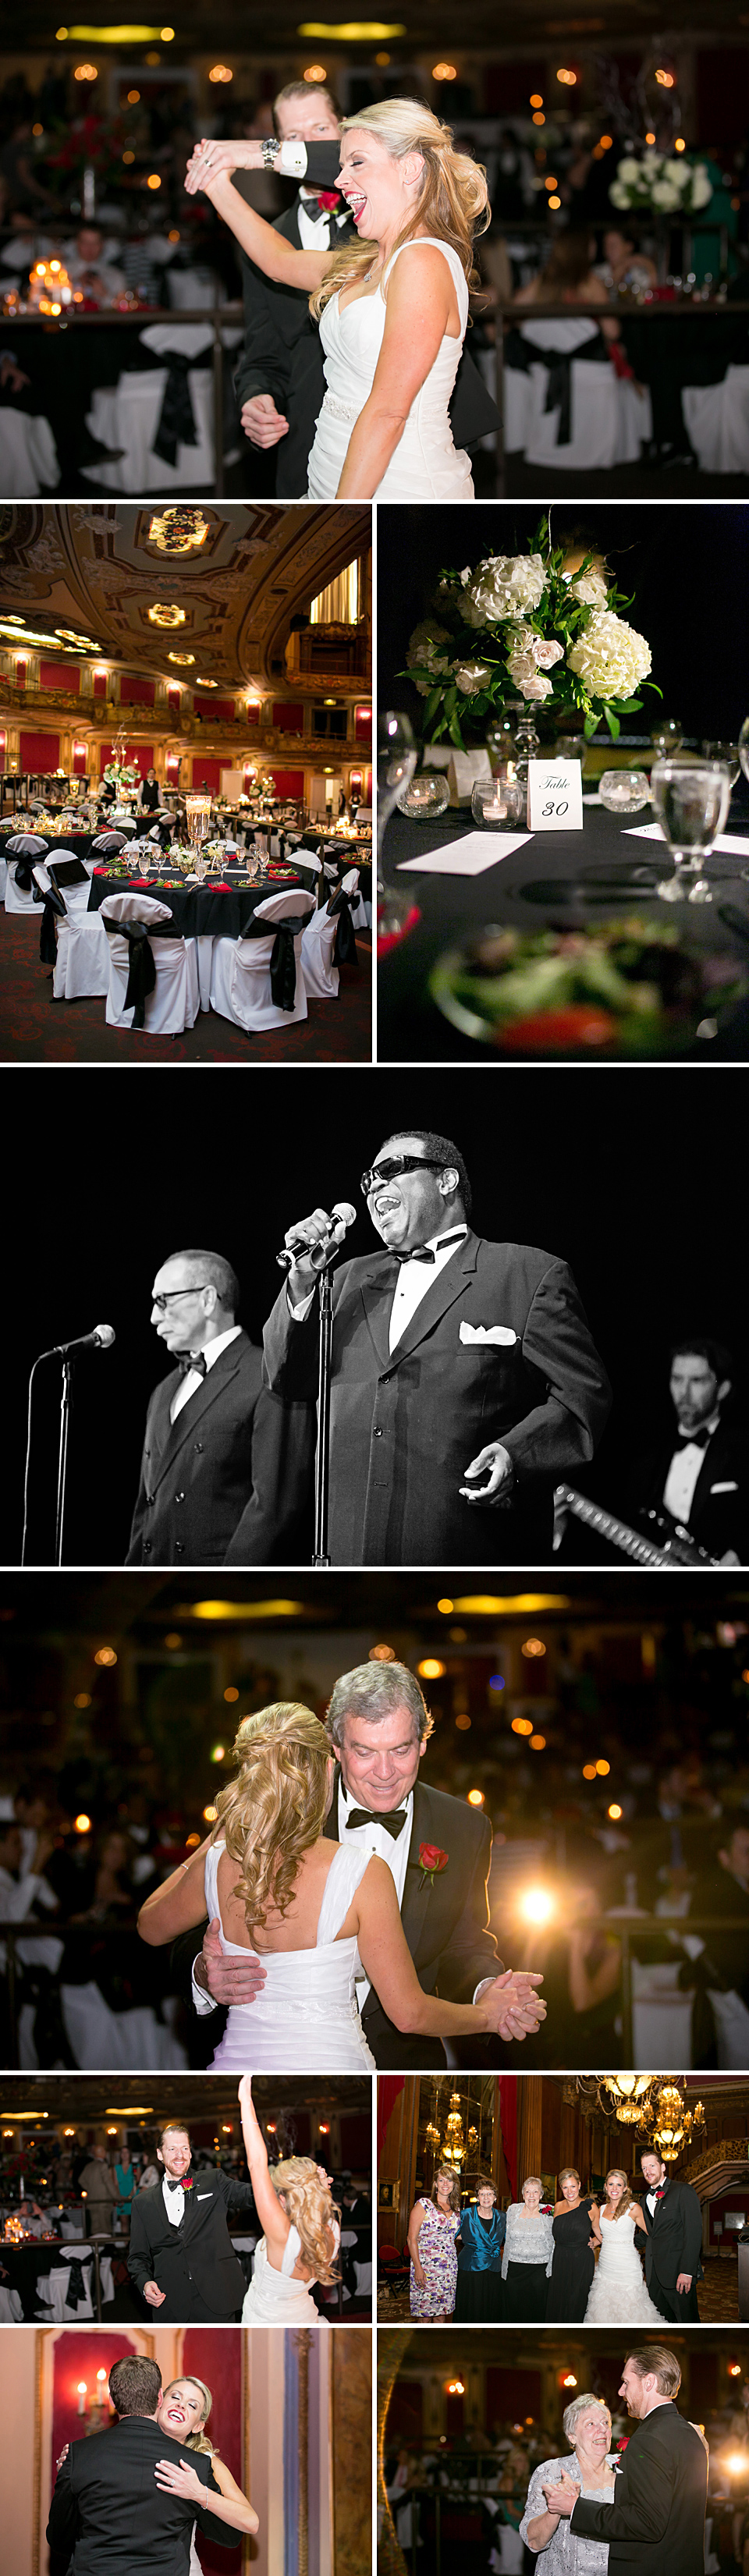 Soiree Event planning, Mary Shalee makeup, The Midland Theatre, KC weddings, Lemonlime Videography, Overland Limousine